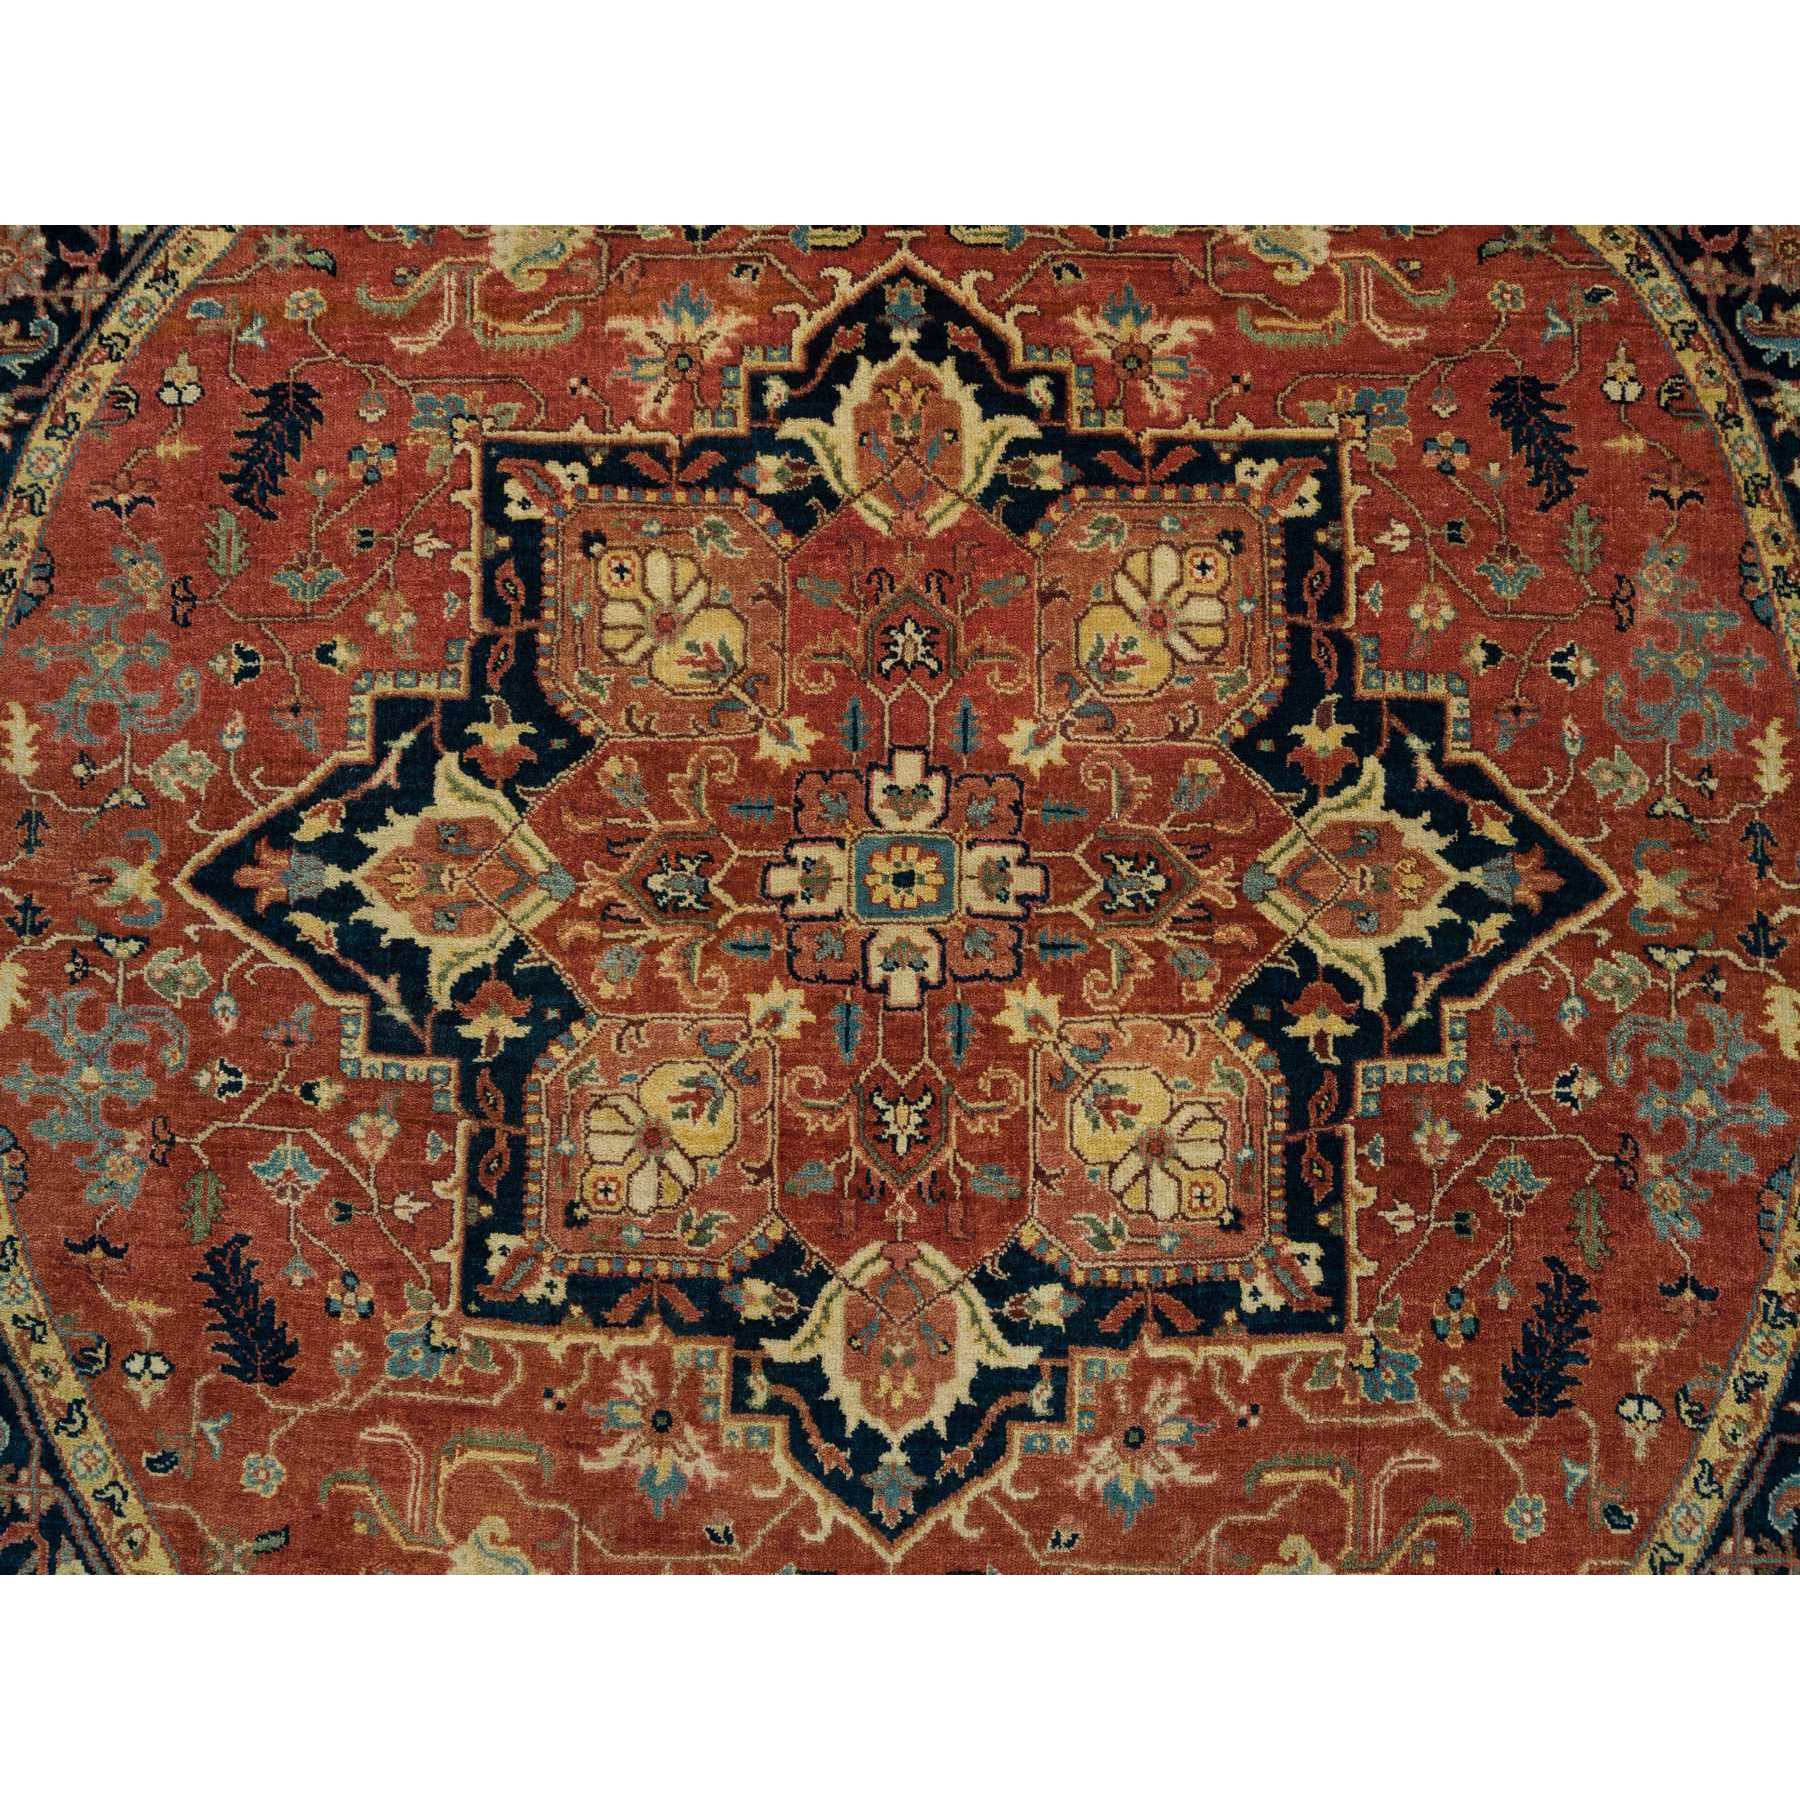 6'2"x6'2" Terracotta Red, Natural Dyes, Dense Weave, Hand Woven, Antiqued Fine Heriz Re-Creation, Organic Wool, Round Oriental Rug 